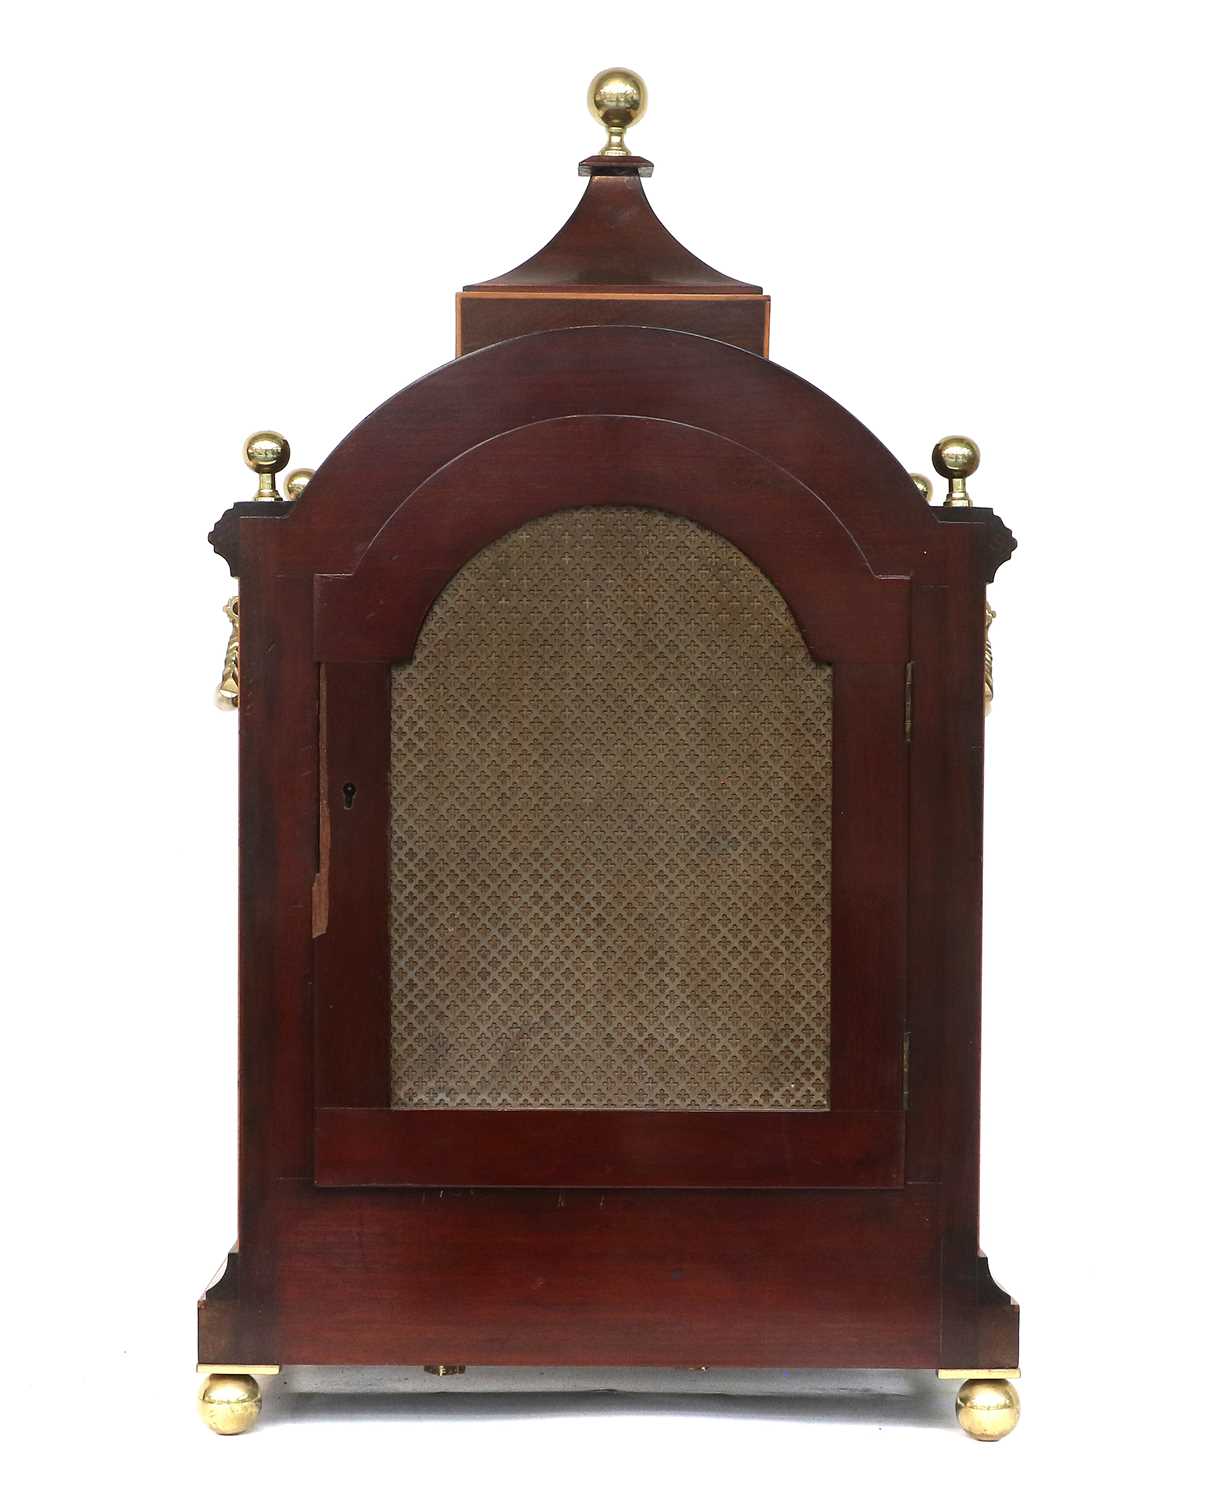 A Mahogany Chiming Table Clock, circa 1900, arched pediment with brass ball finials, stop brass - Image 3 of 5